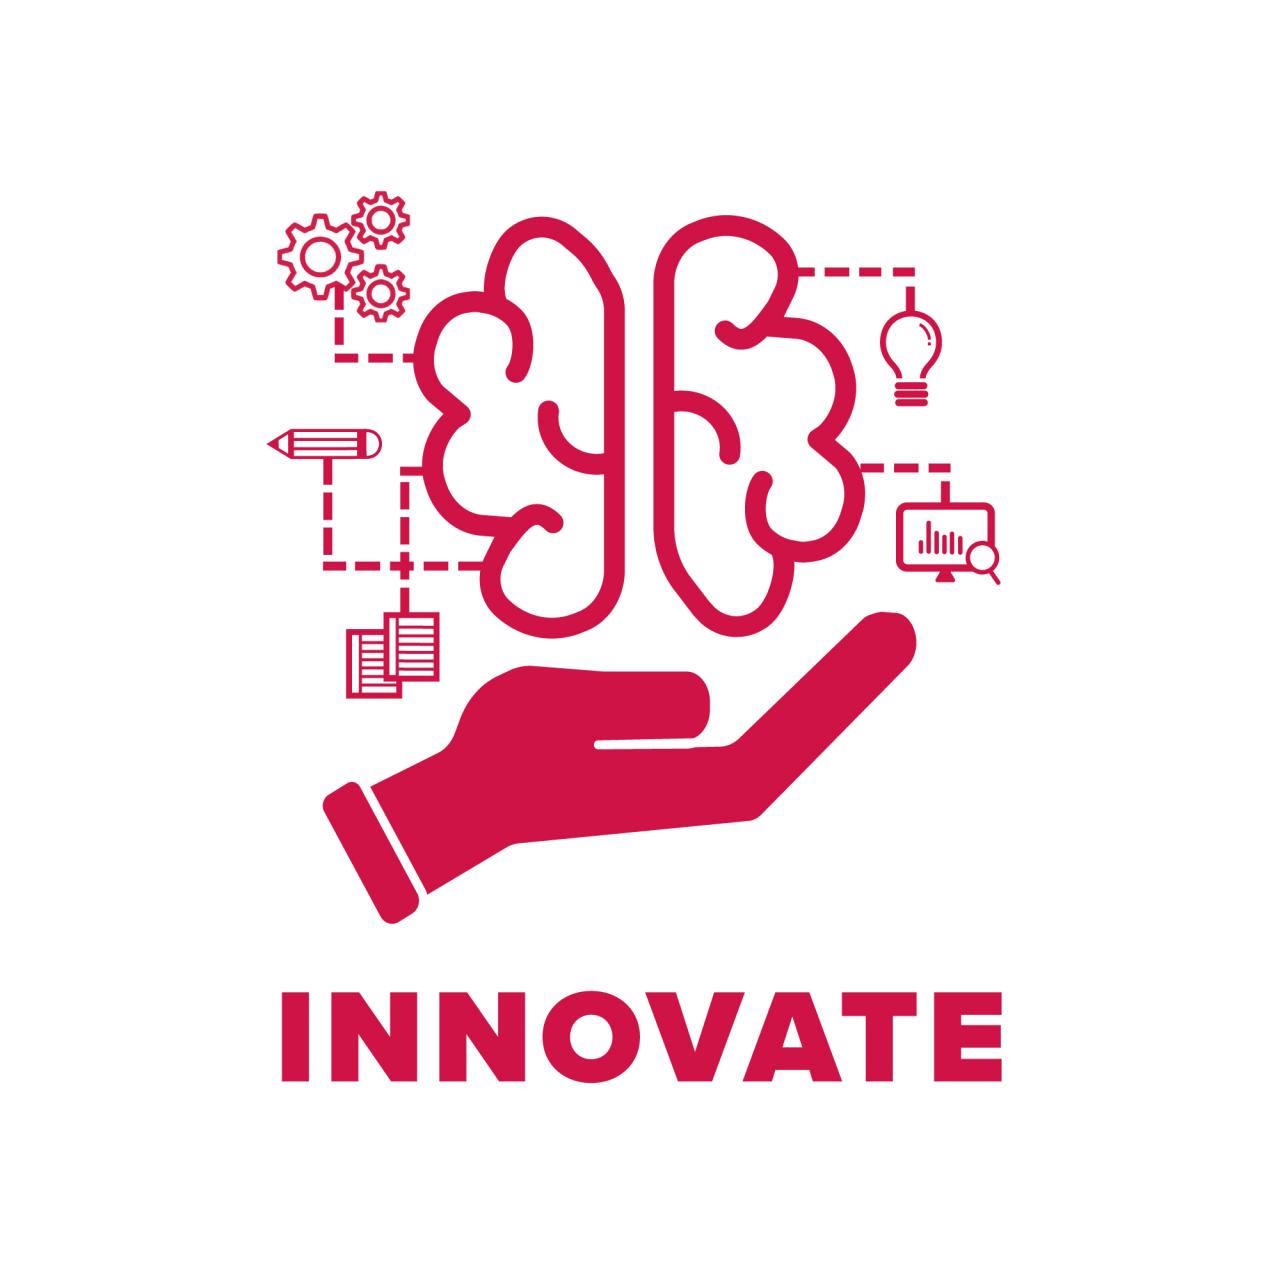 A red graphic depicting a hand holding a brain with numerous thoughts going through it including a lightbulb, gears, papers, data, and pencil. The title at the bottom reads "Innovate"